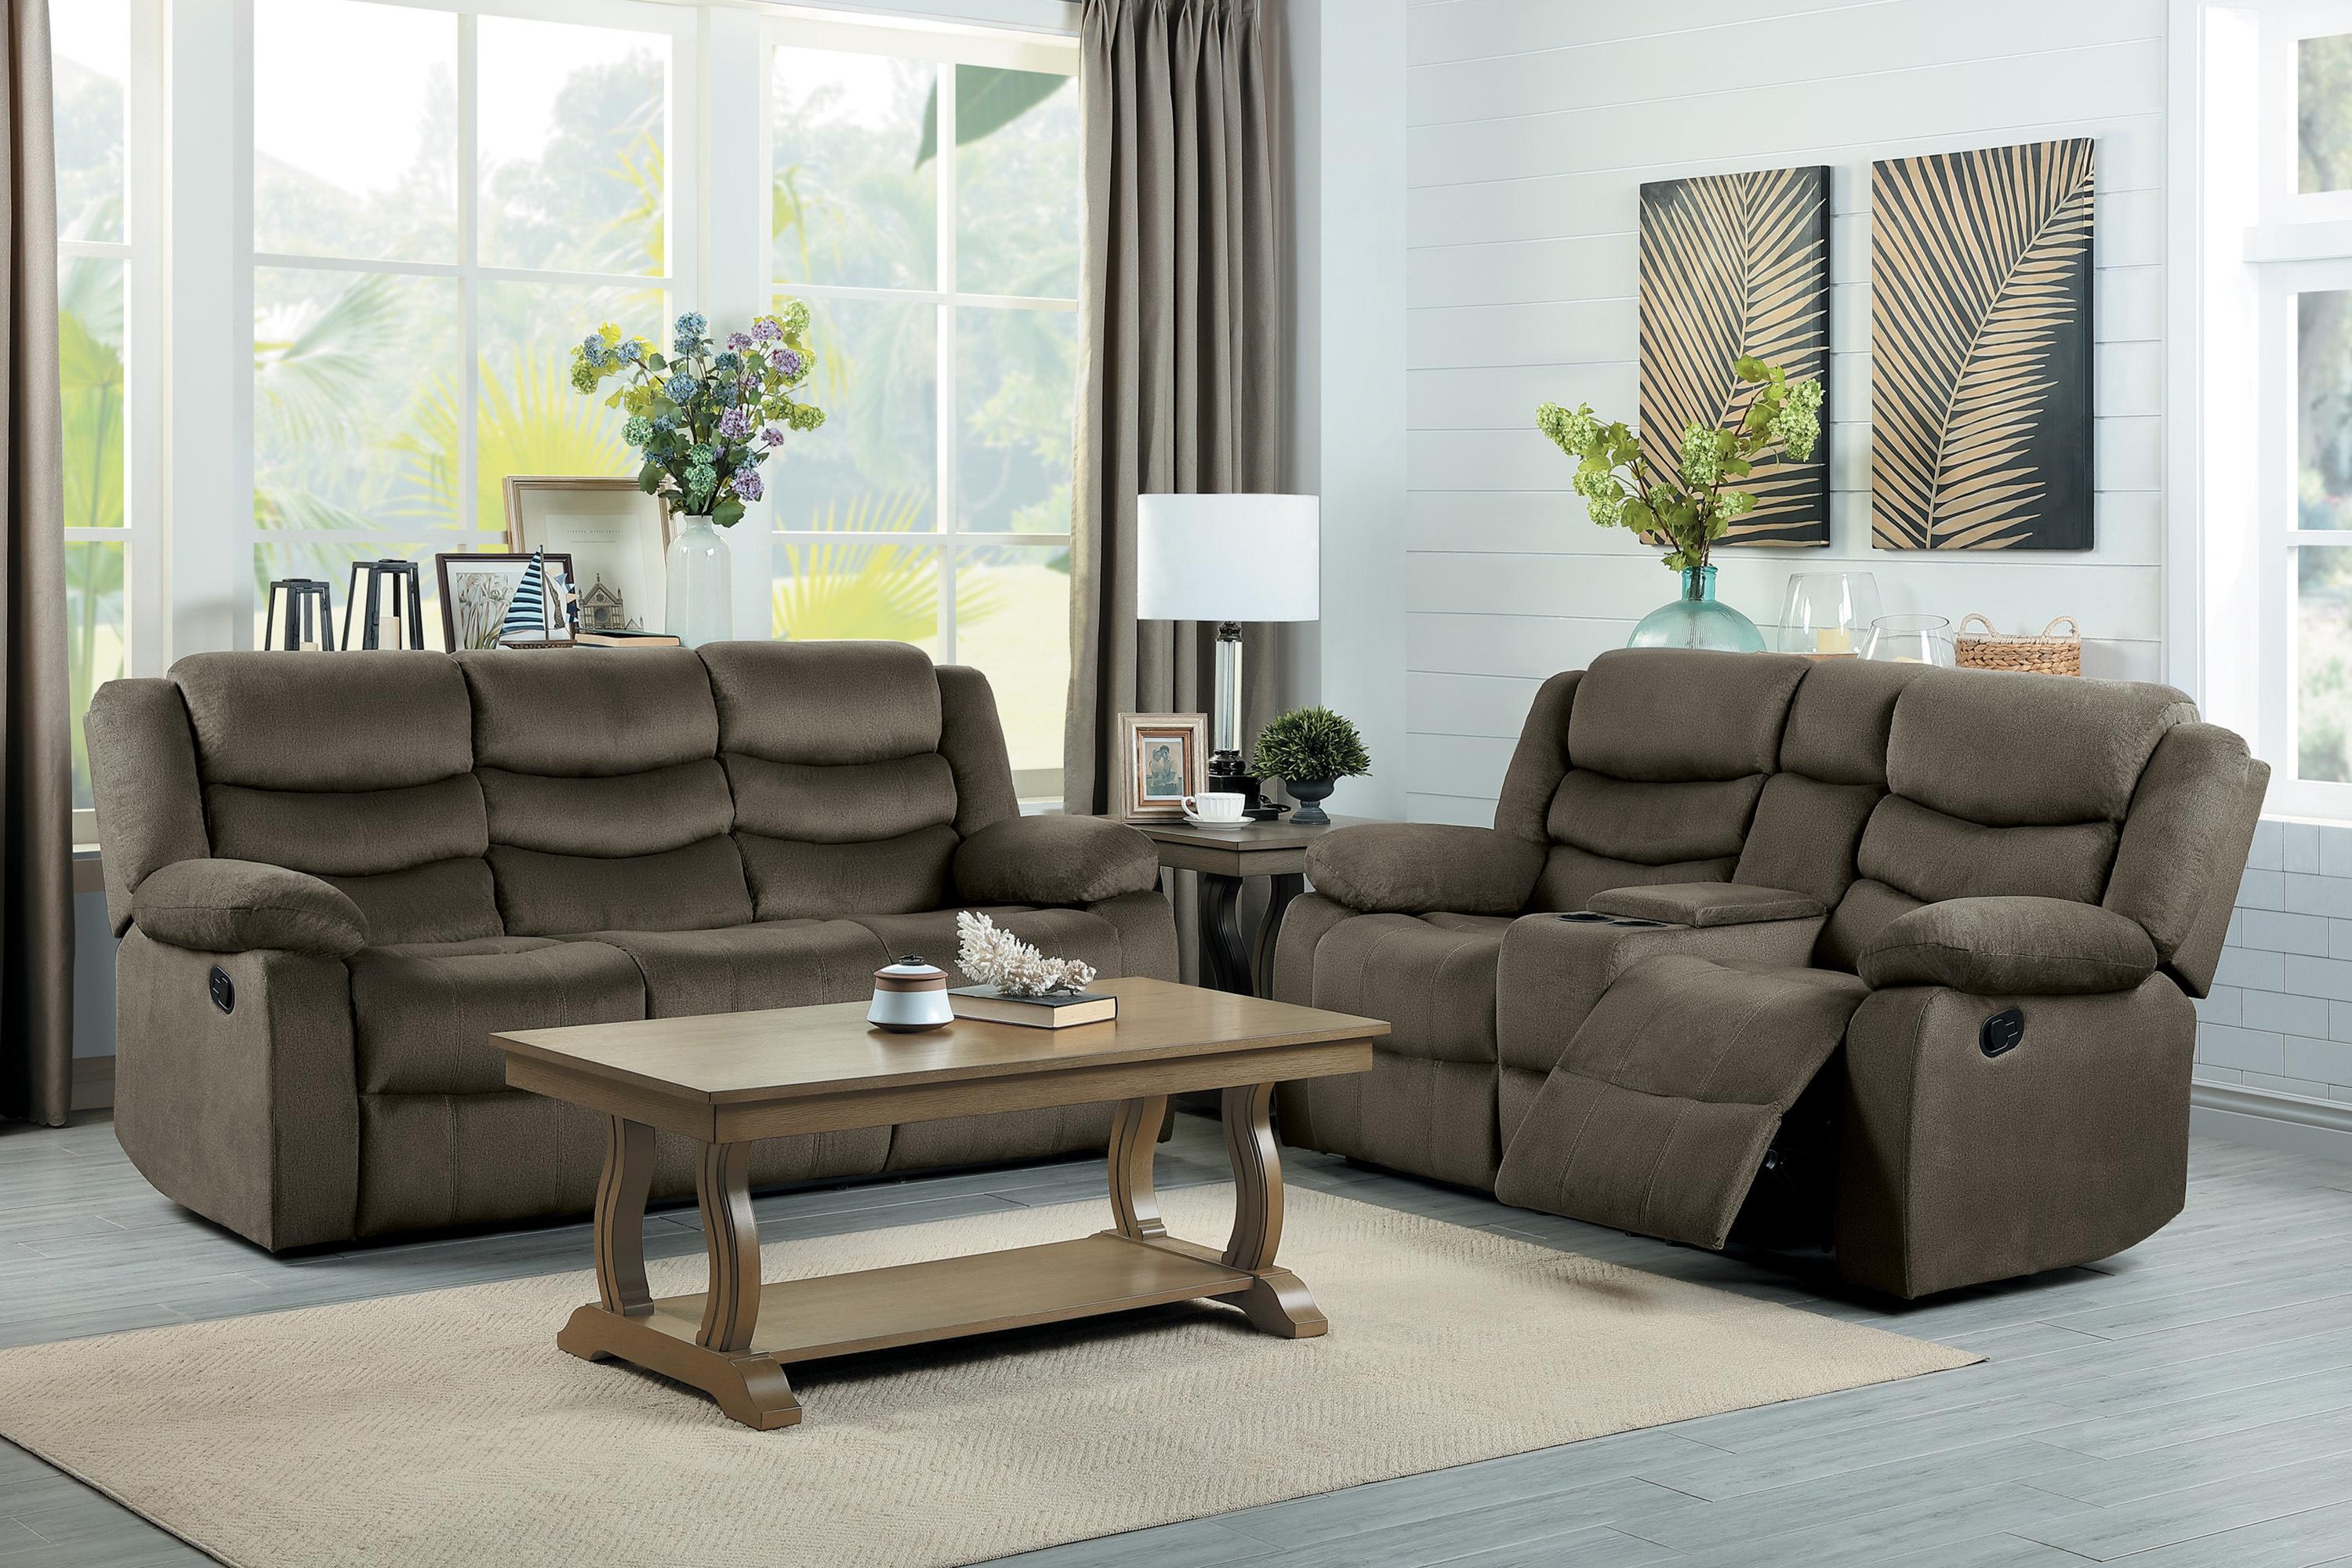 Transitional Reclining Sofa Set 9526BR-2PC Discus 9526BR-2PC in Brown Microfiber